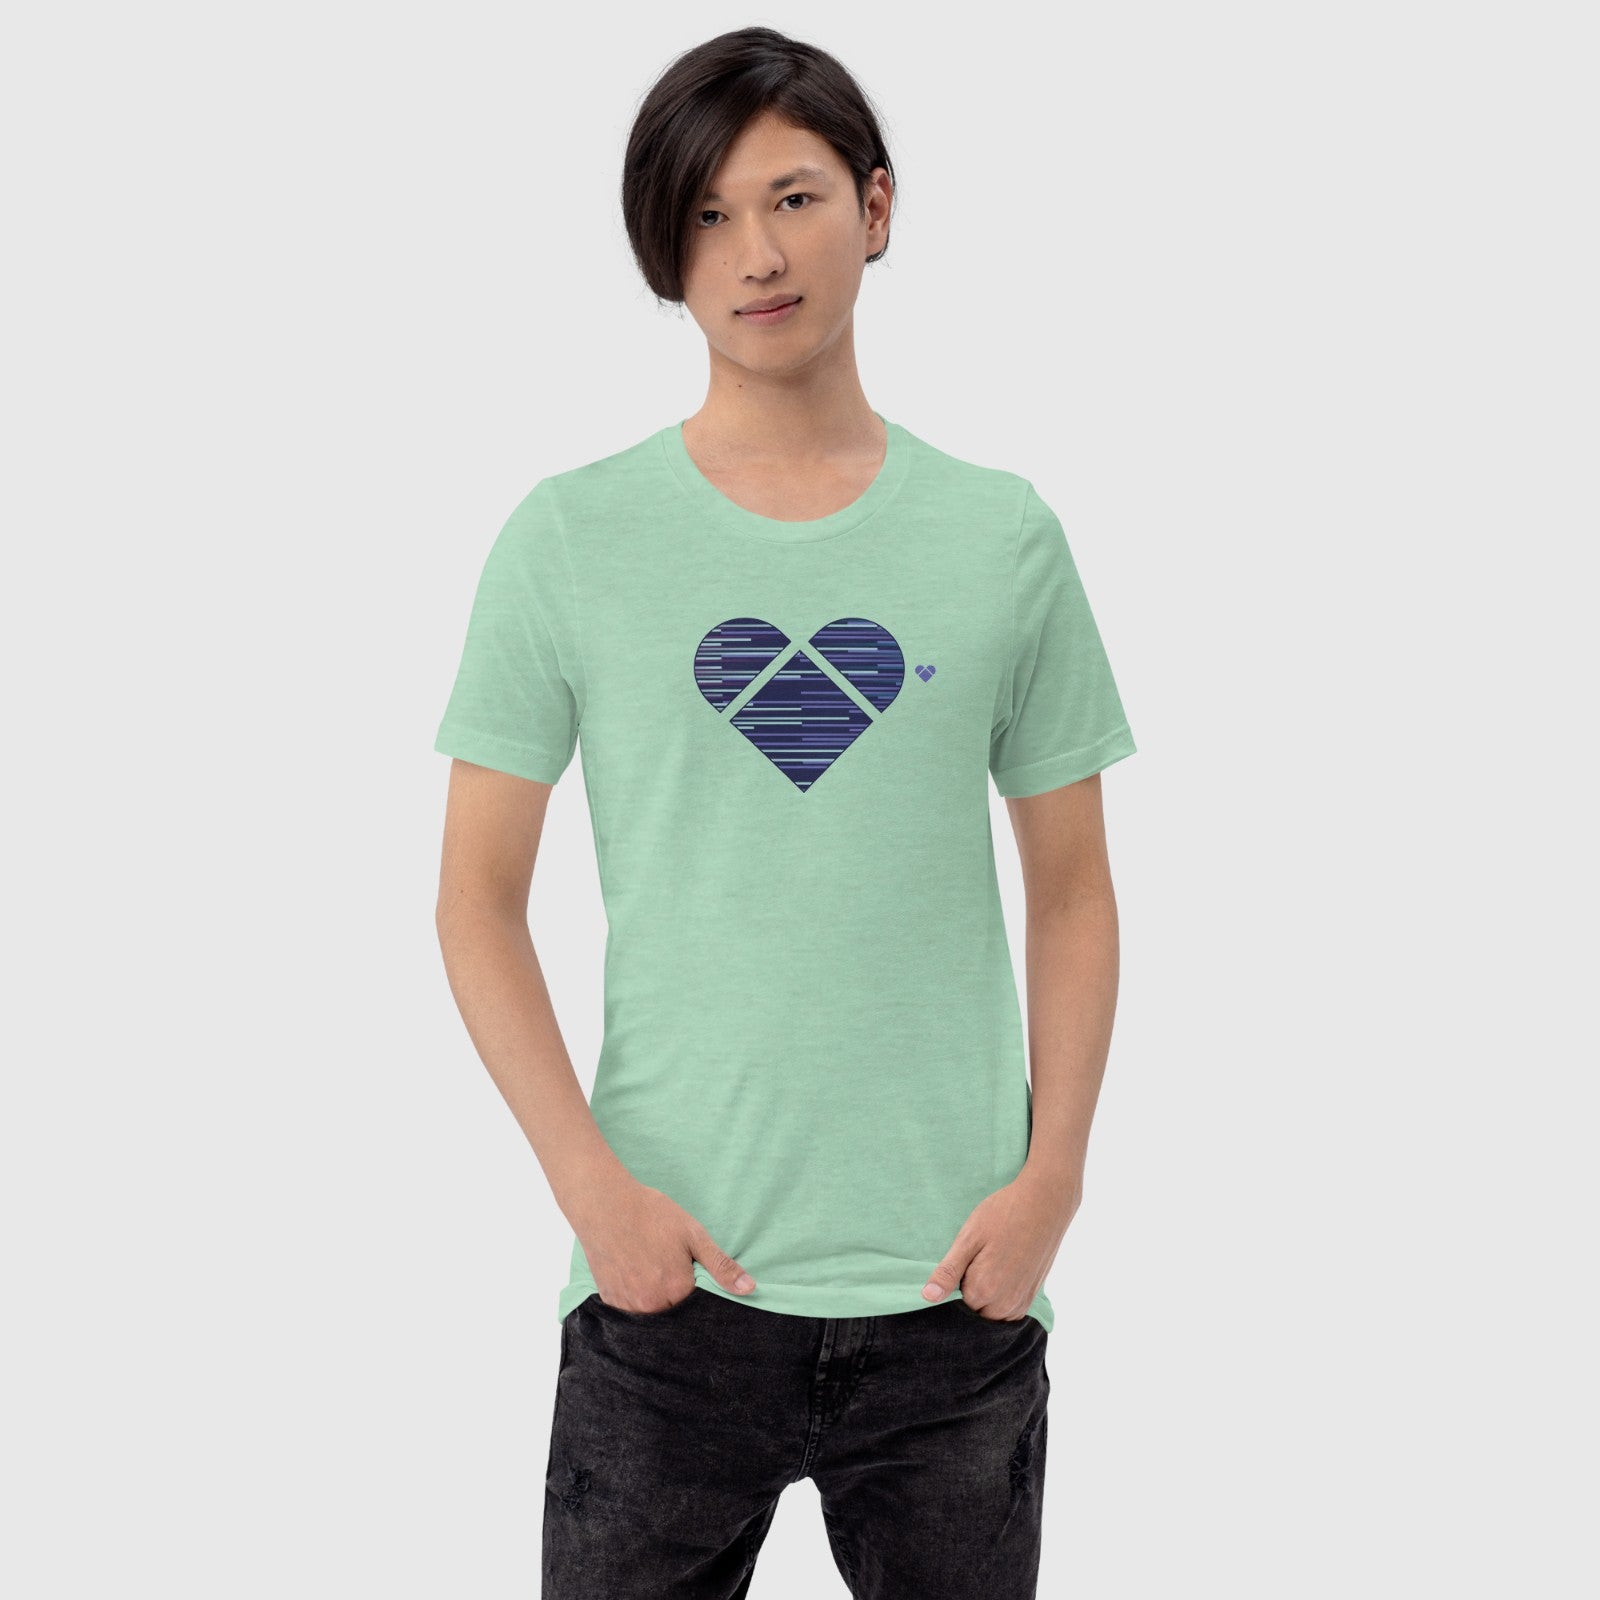 Small CRiZ AMOR heart logo on front of Mint Tee